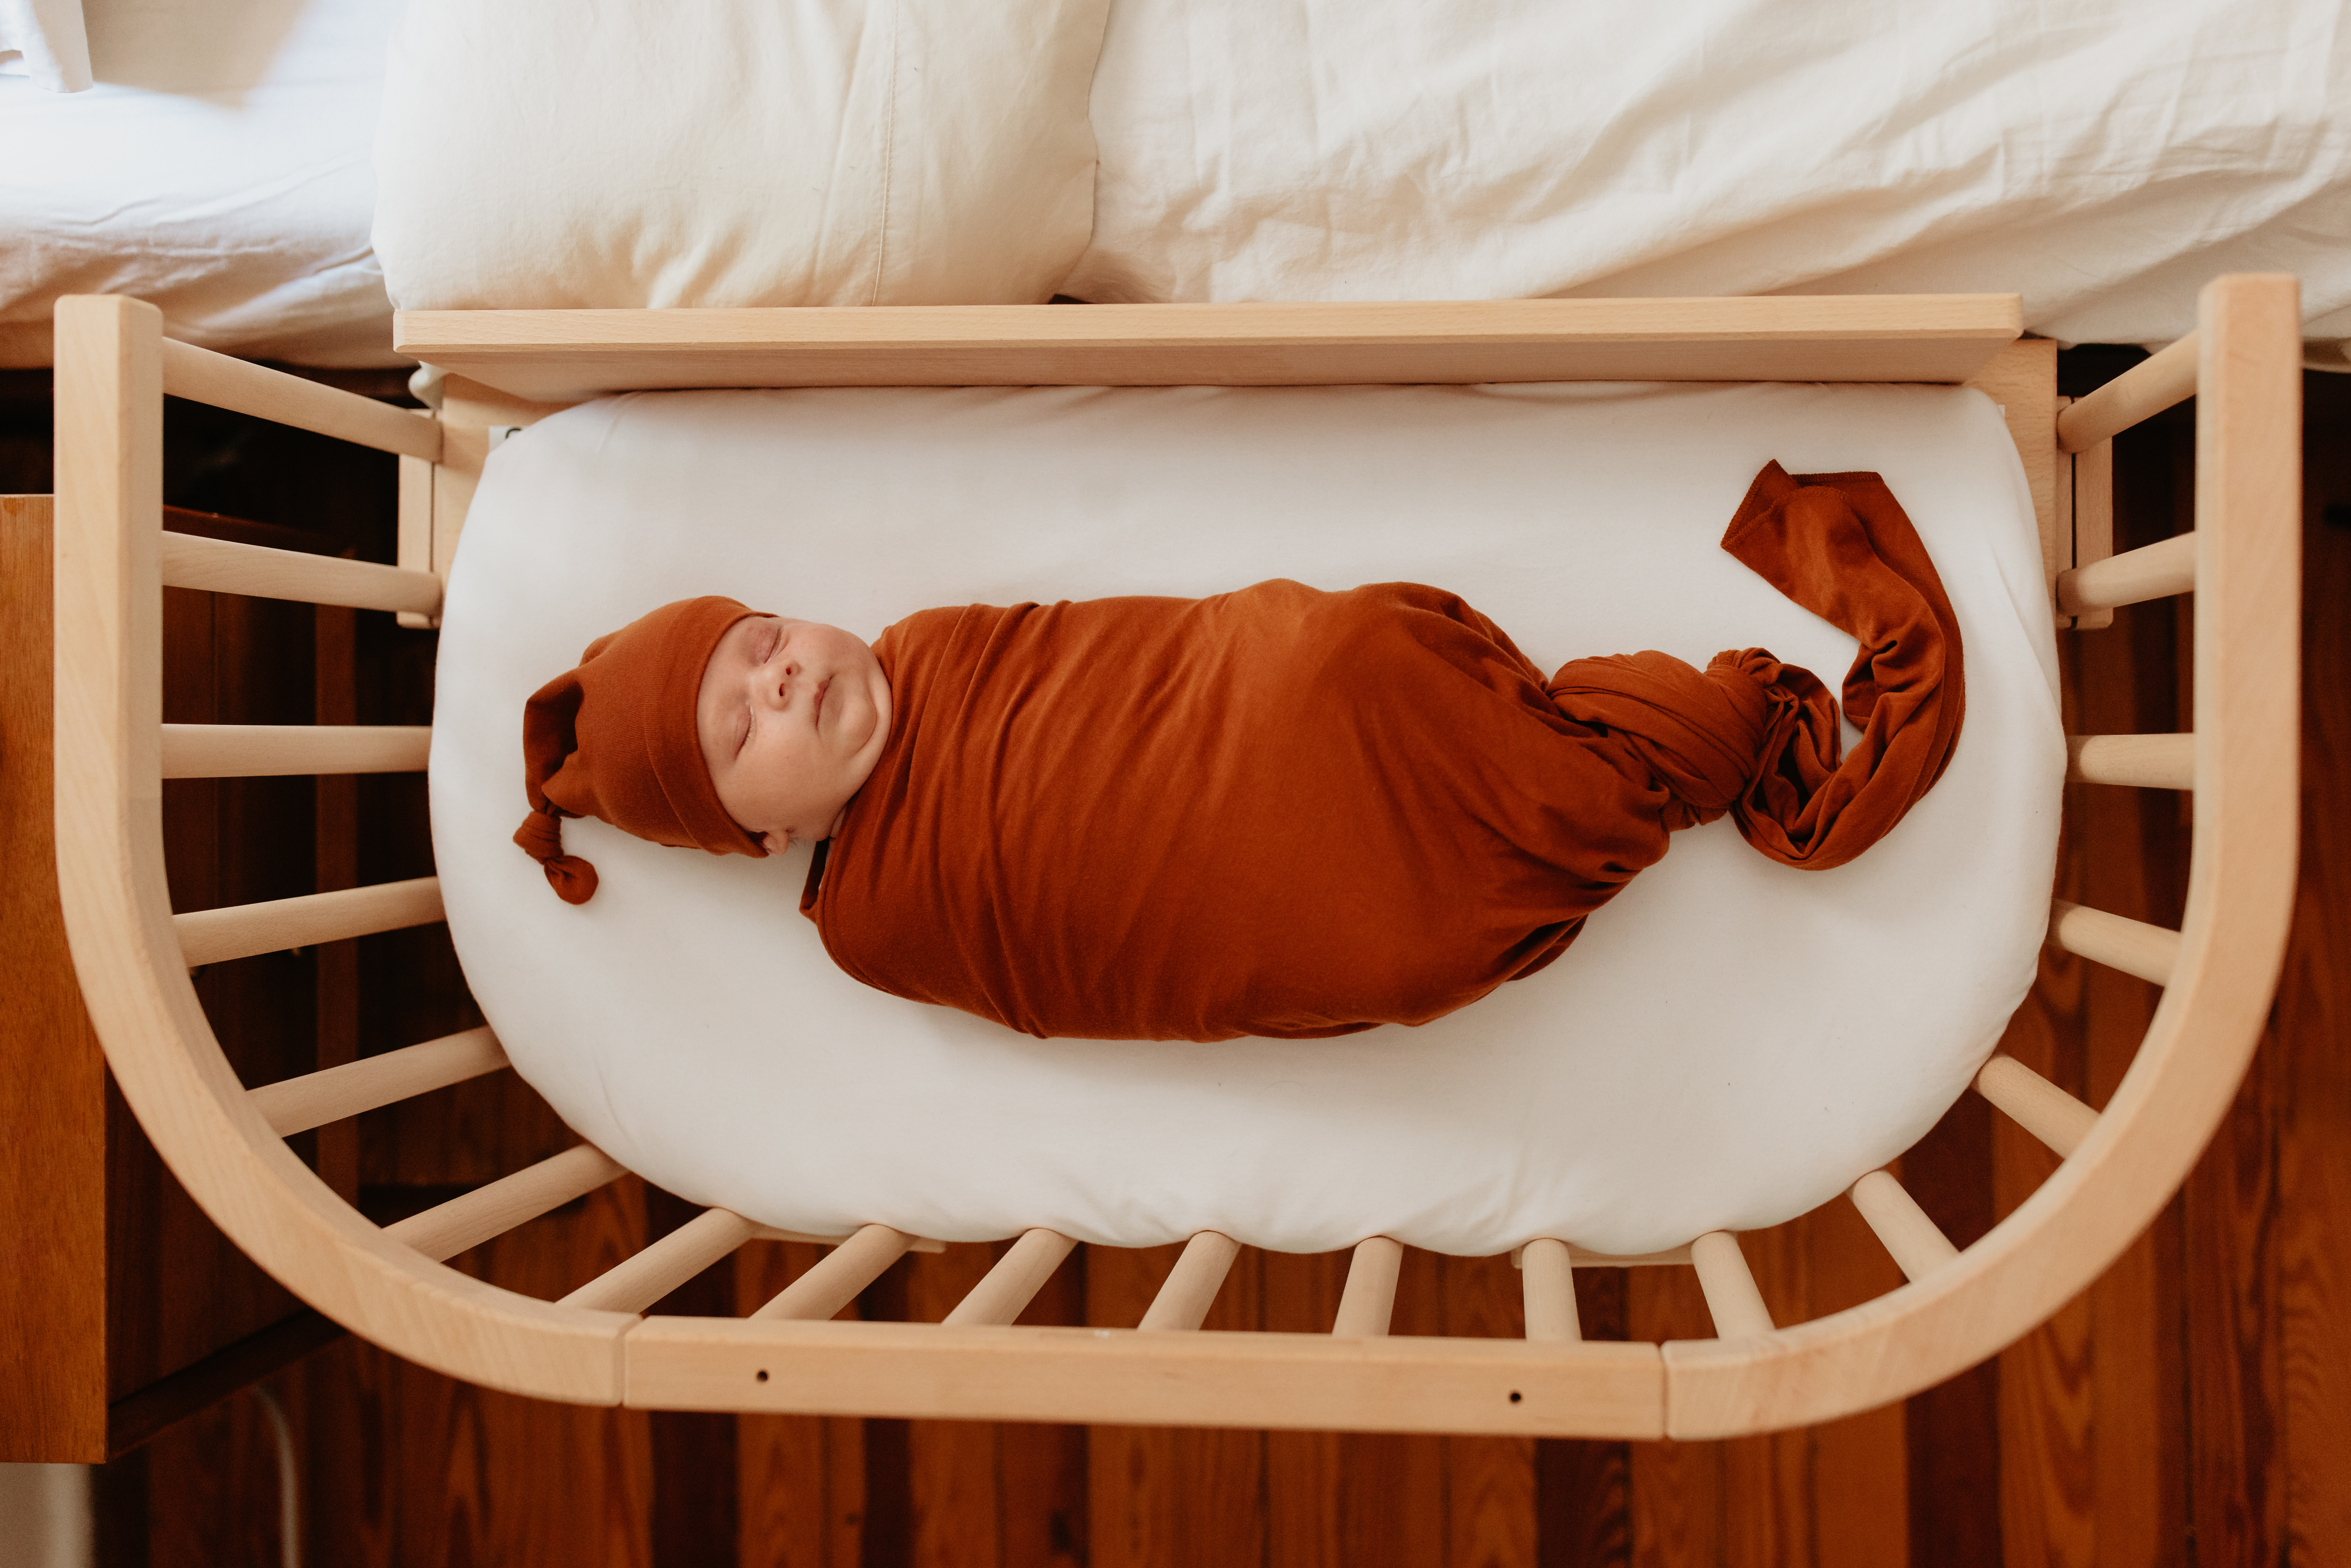 Do Babies Dream When They’re Asleep?